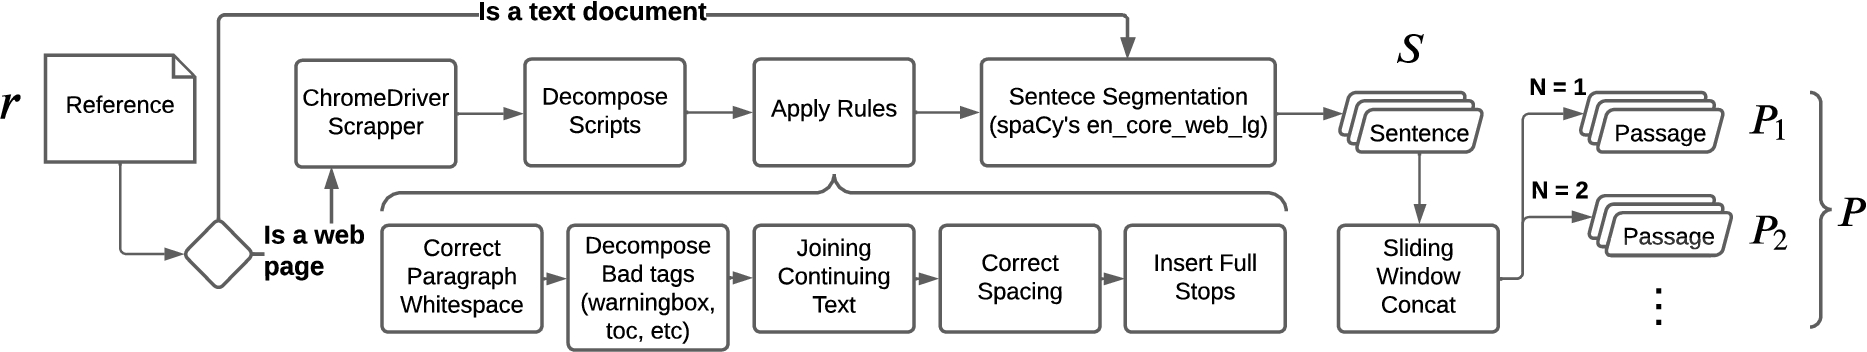 Illustration of the text extraction module’s workflow, taking a reference r as input, dividing its text into a set of segments S, and concatenating them into a set of extracted passages P.